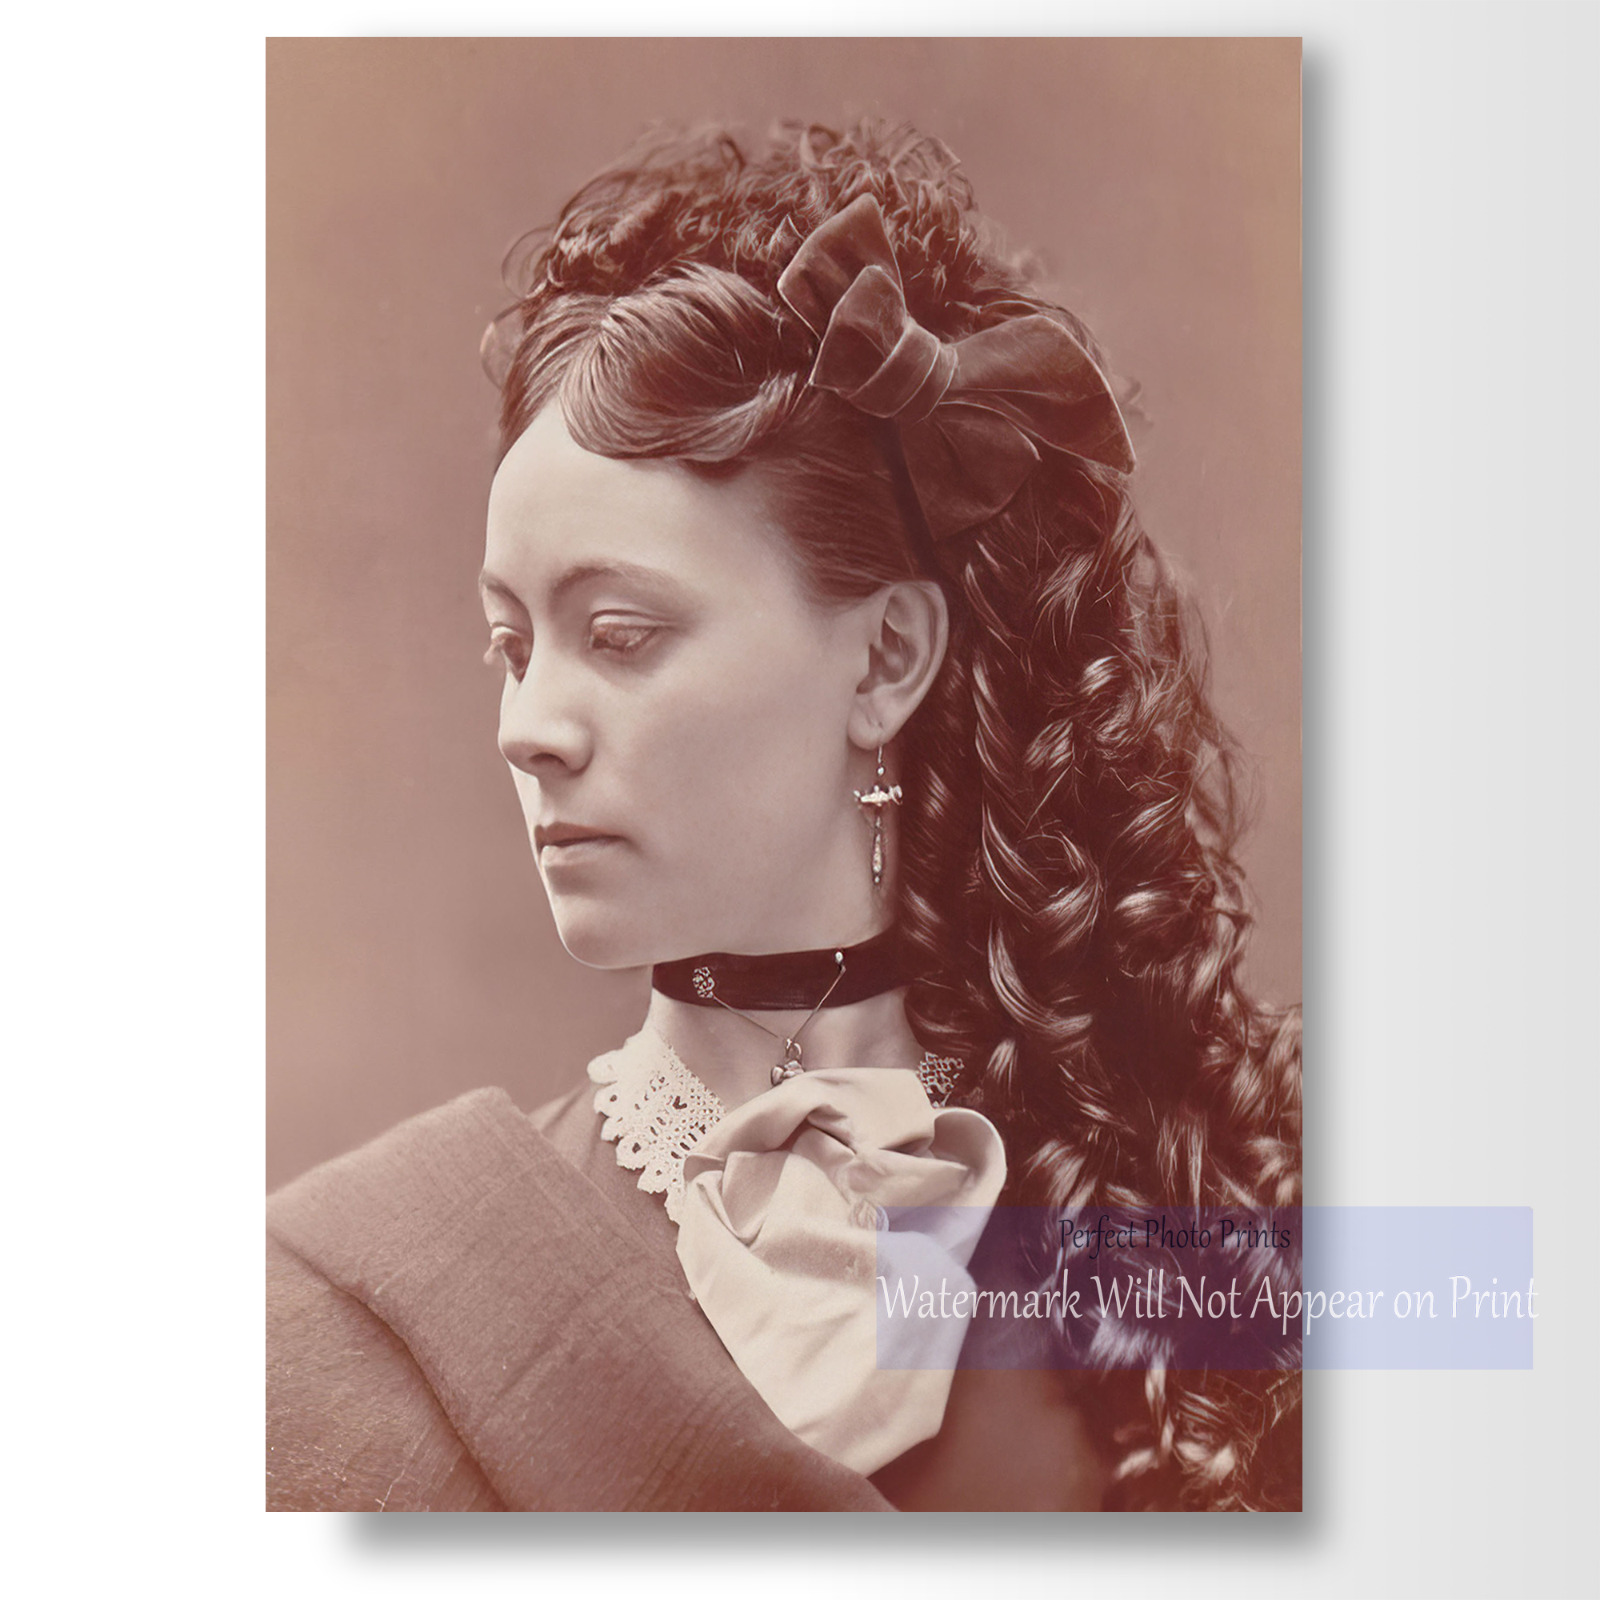 Victorian Elegance - Exquisite Woman, Choker Necklace, Earrings, Photo Print